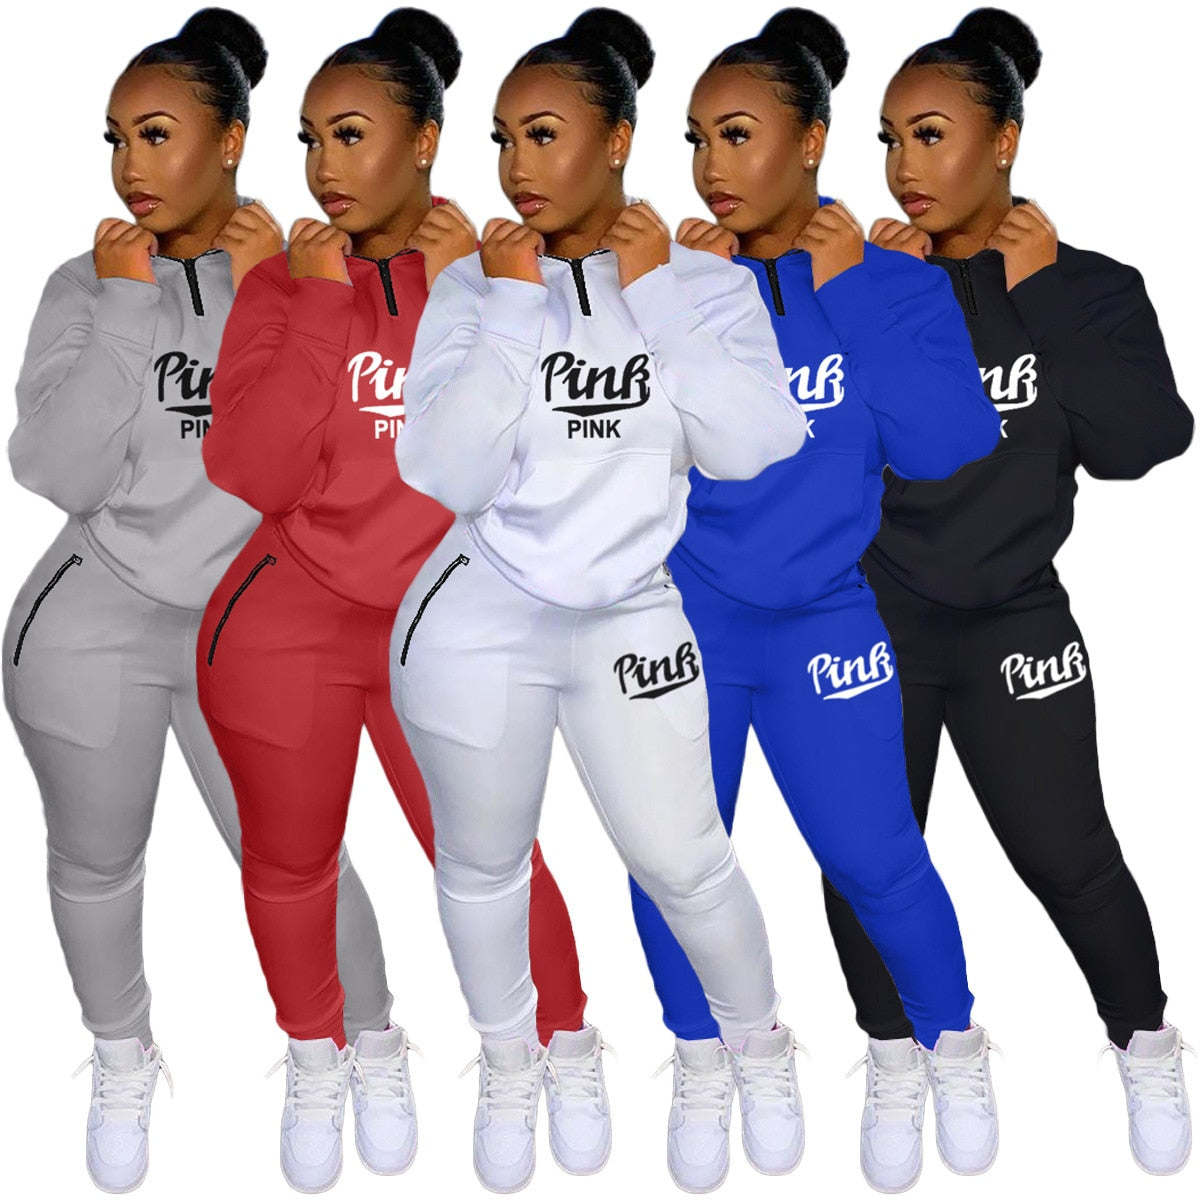 Fall Winter Tracksuits Two Piece Set Women Pink Letter Print Sport Casual Outfits Zip Sweatshirt Top+Pants Set Women Sweat Suits